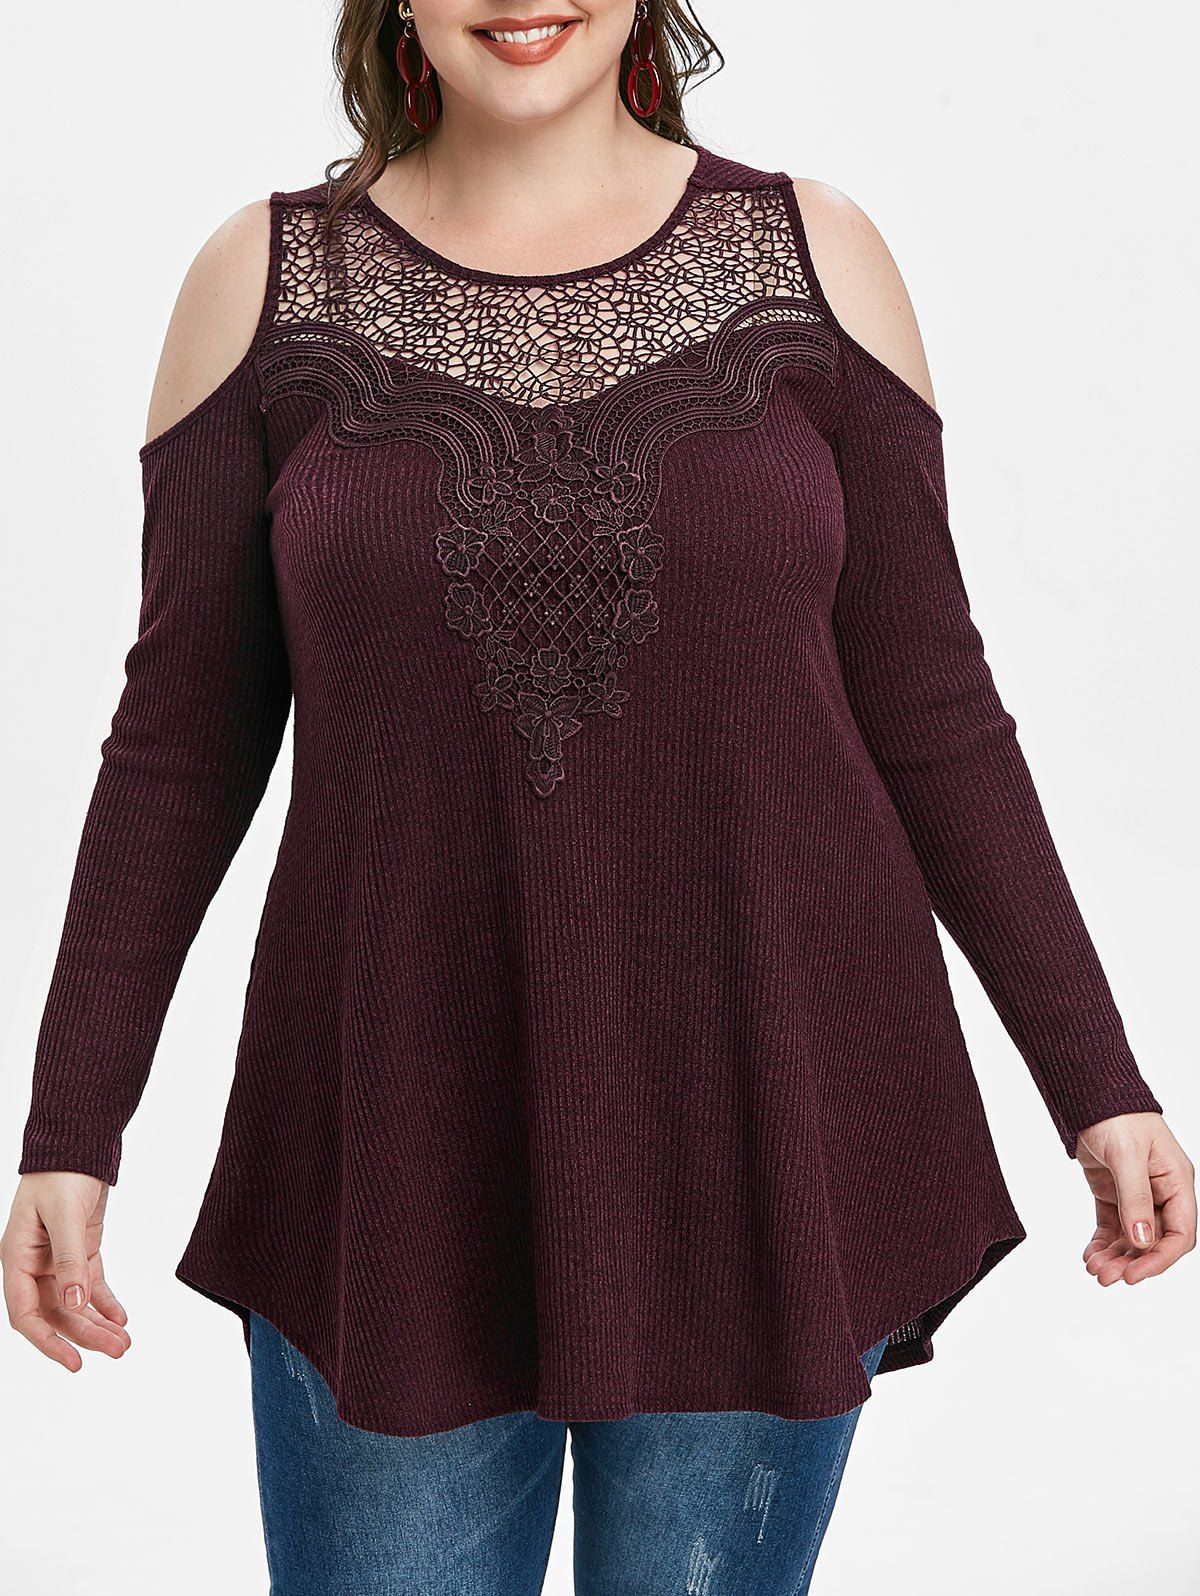 Plus Size Cold Shoulder Lace Insert Knitwear - RED WINE L